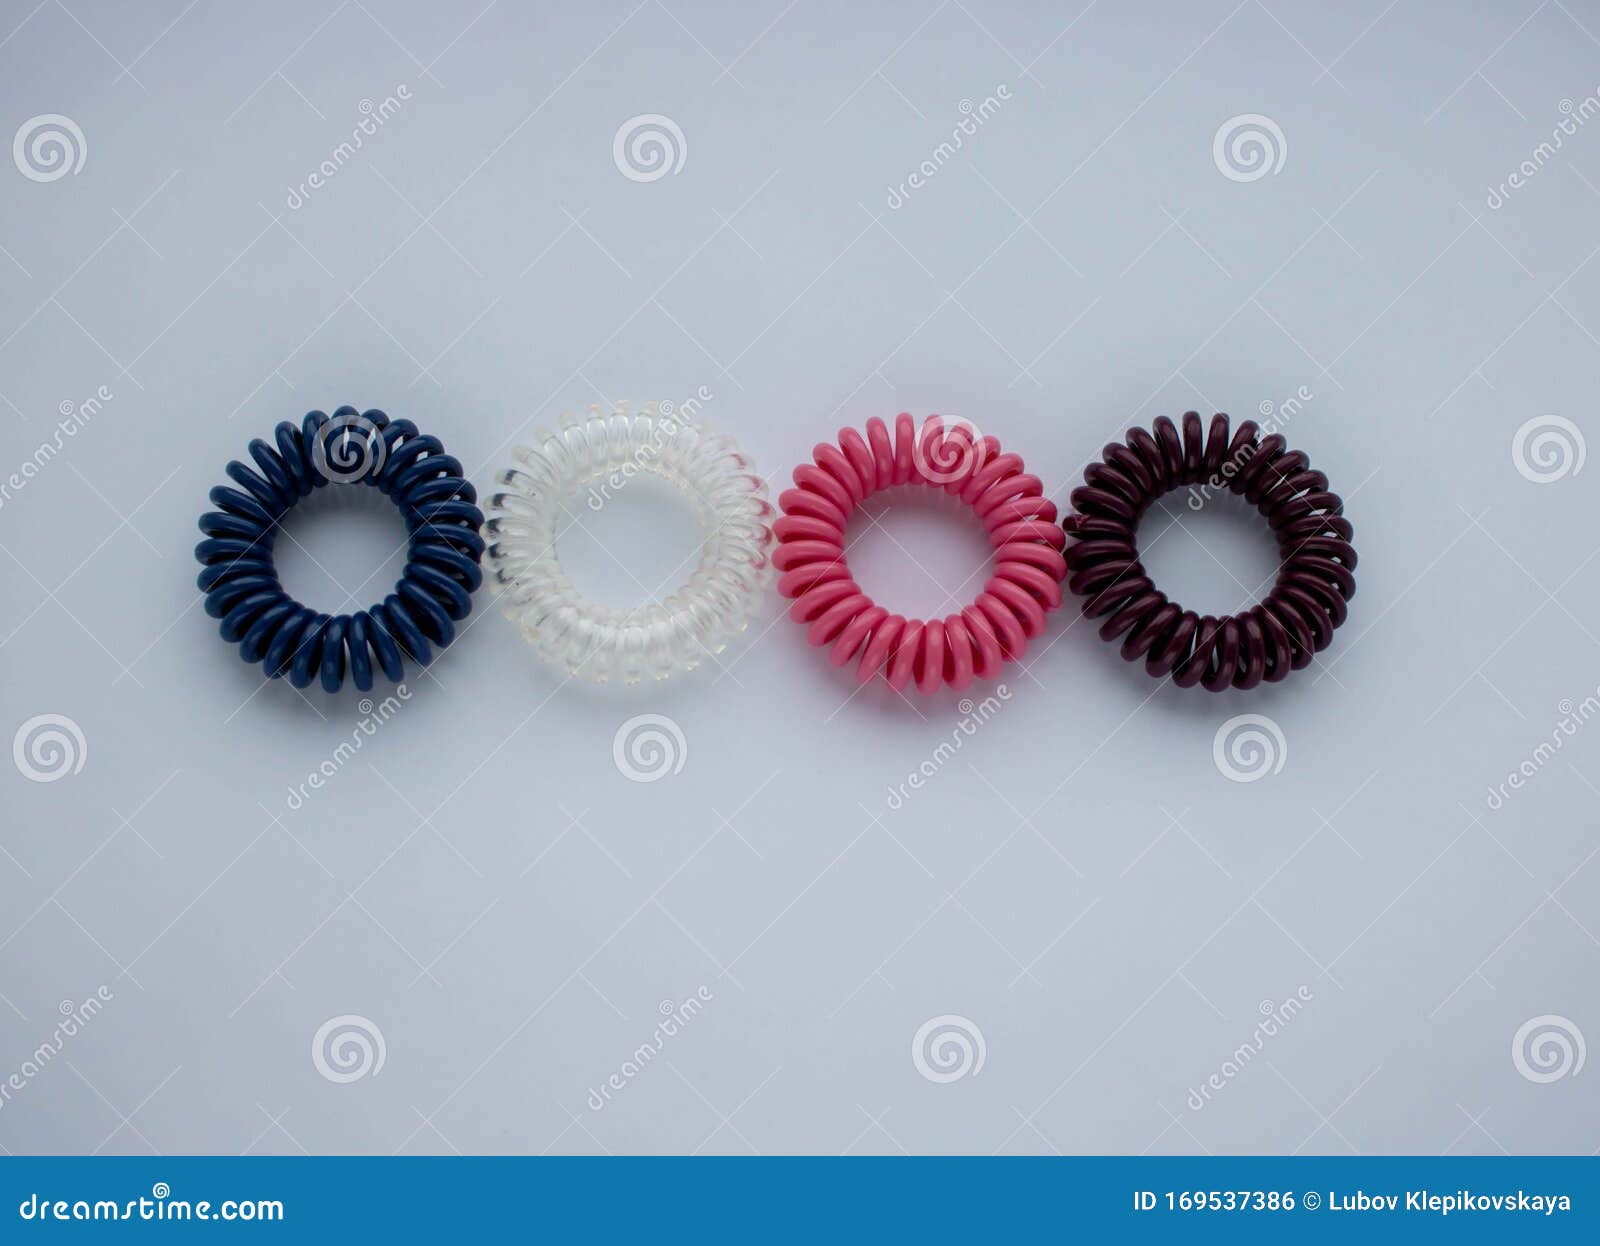 Four Colorful Spiral Rubber Bands. Elastic Hair Ties in Vibrant Colors ...